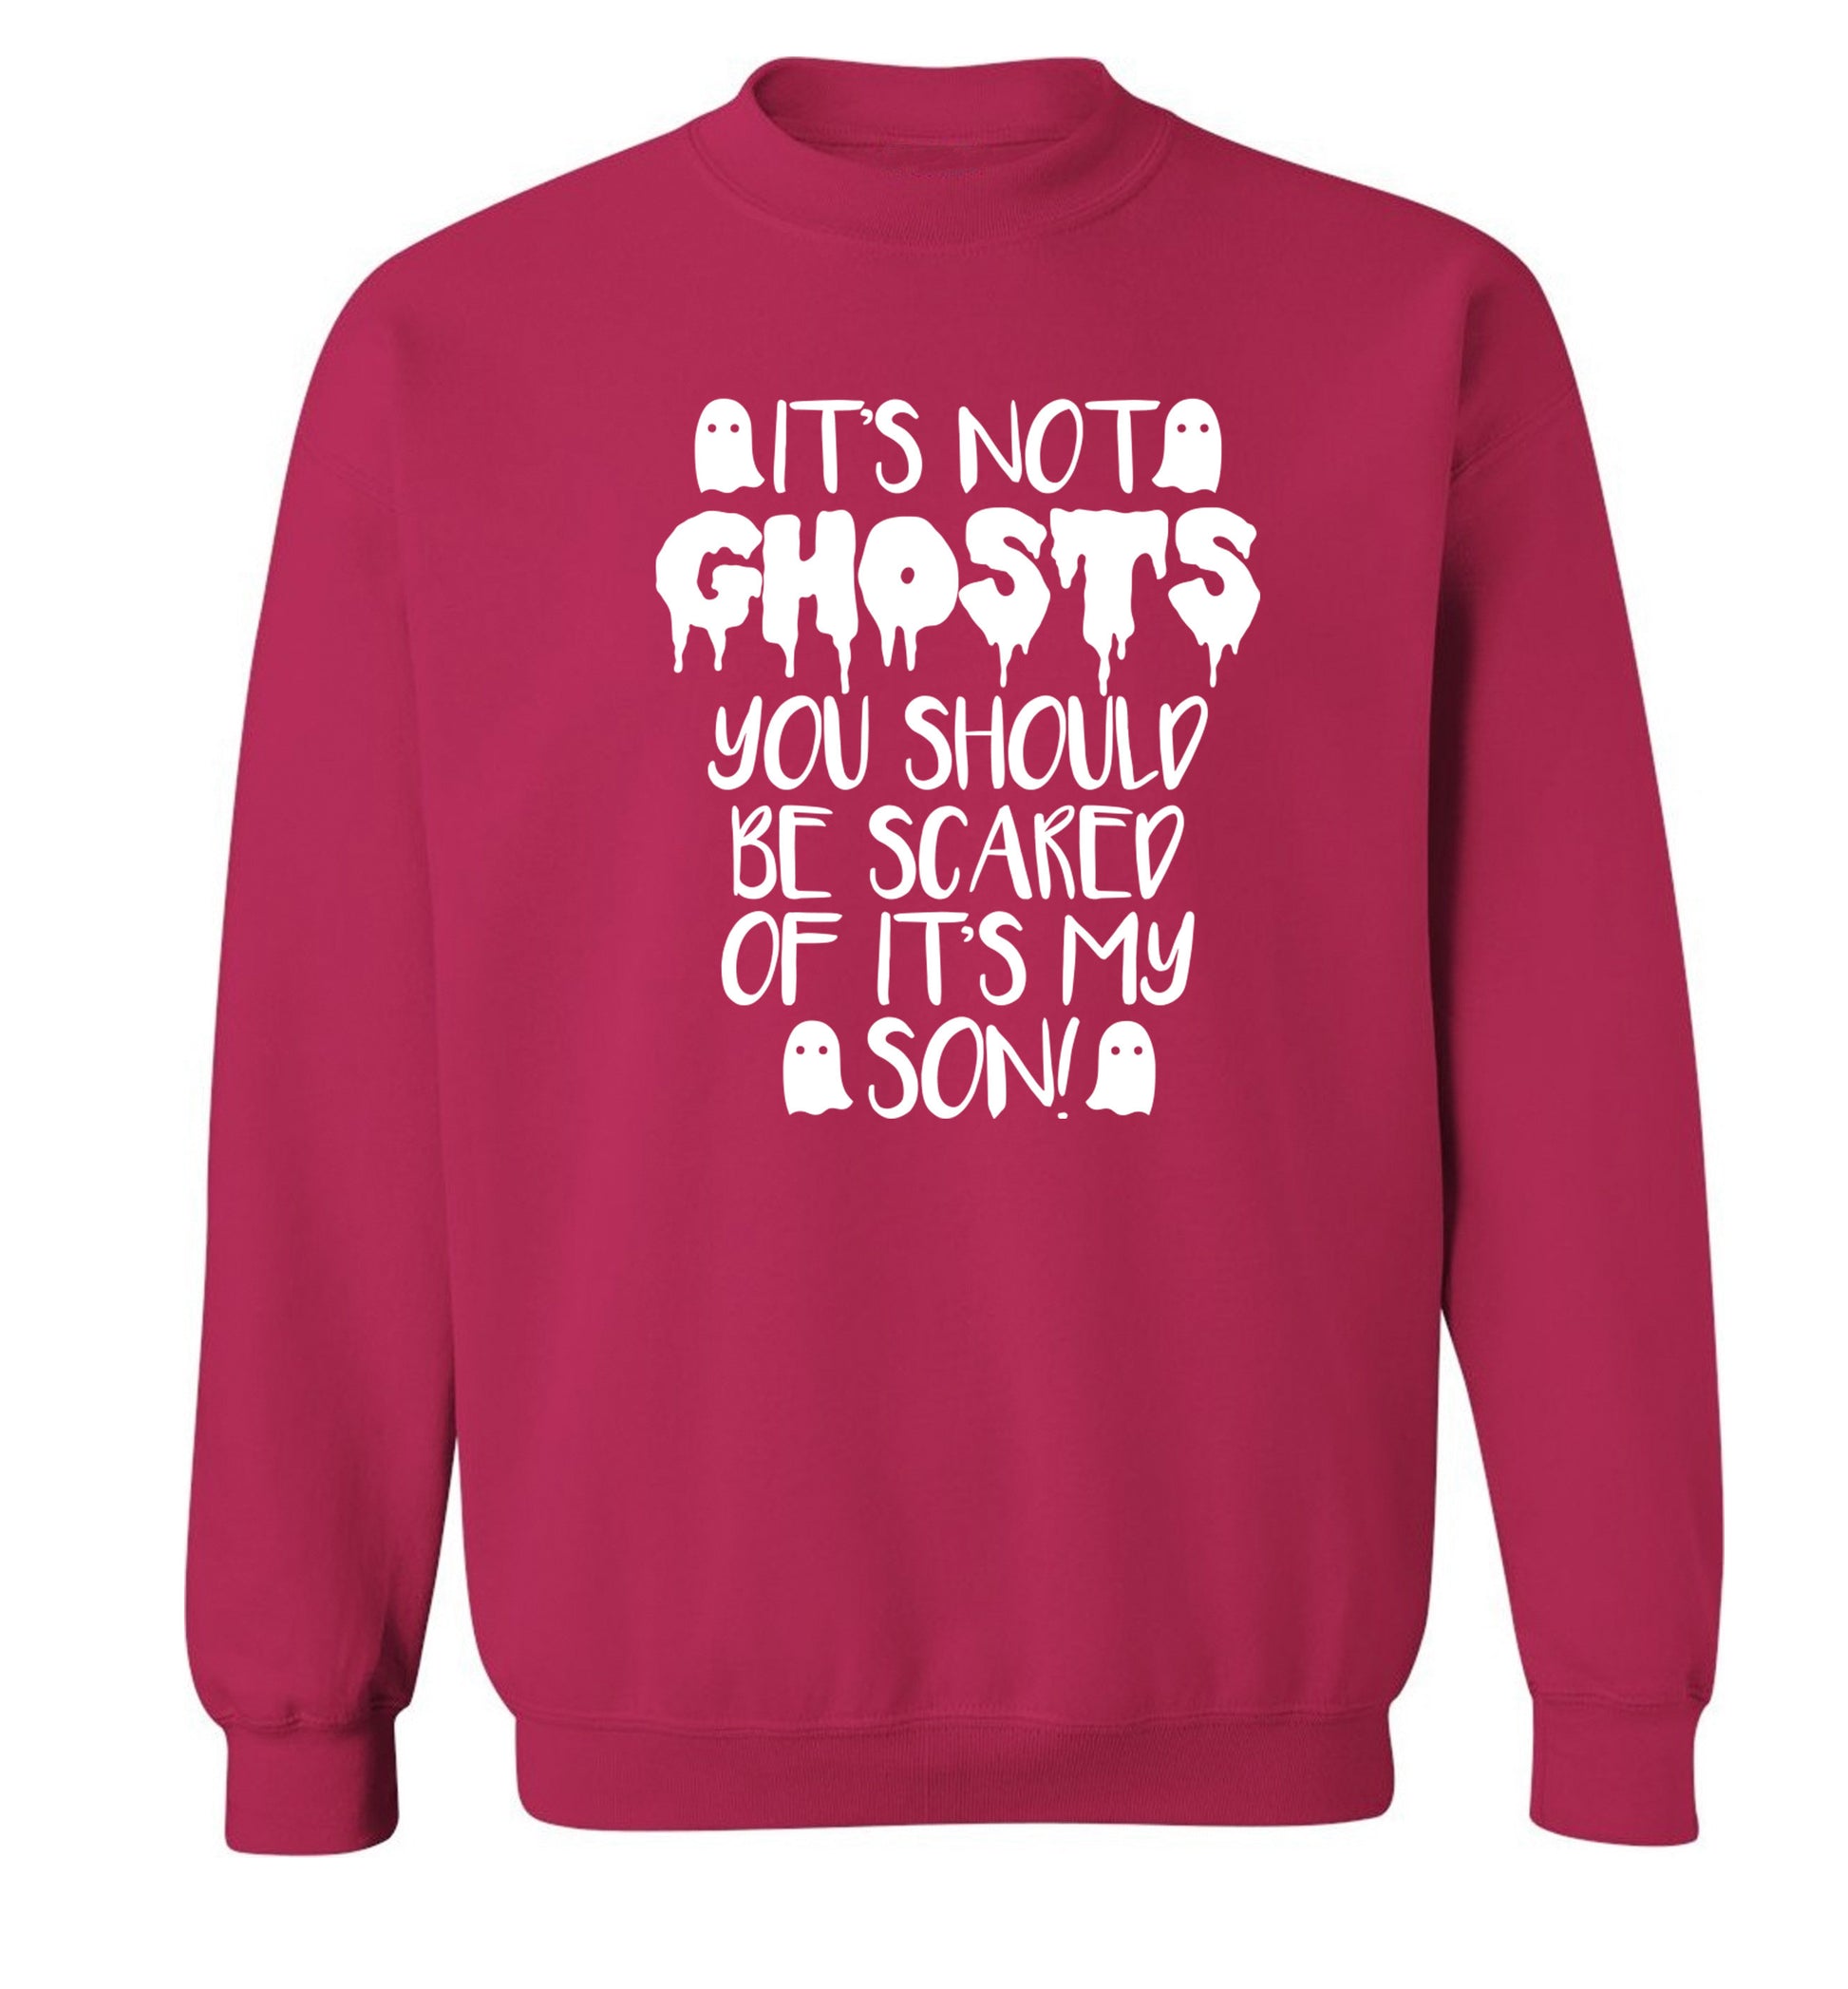 It's not ghosts you should be scared of it's my son! Adult's unisex pink Sweater 2XL